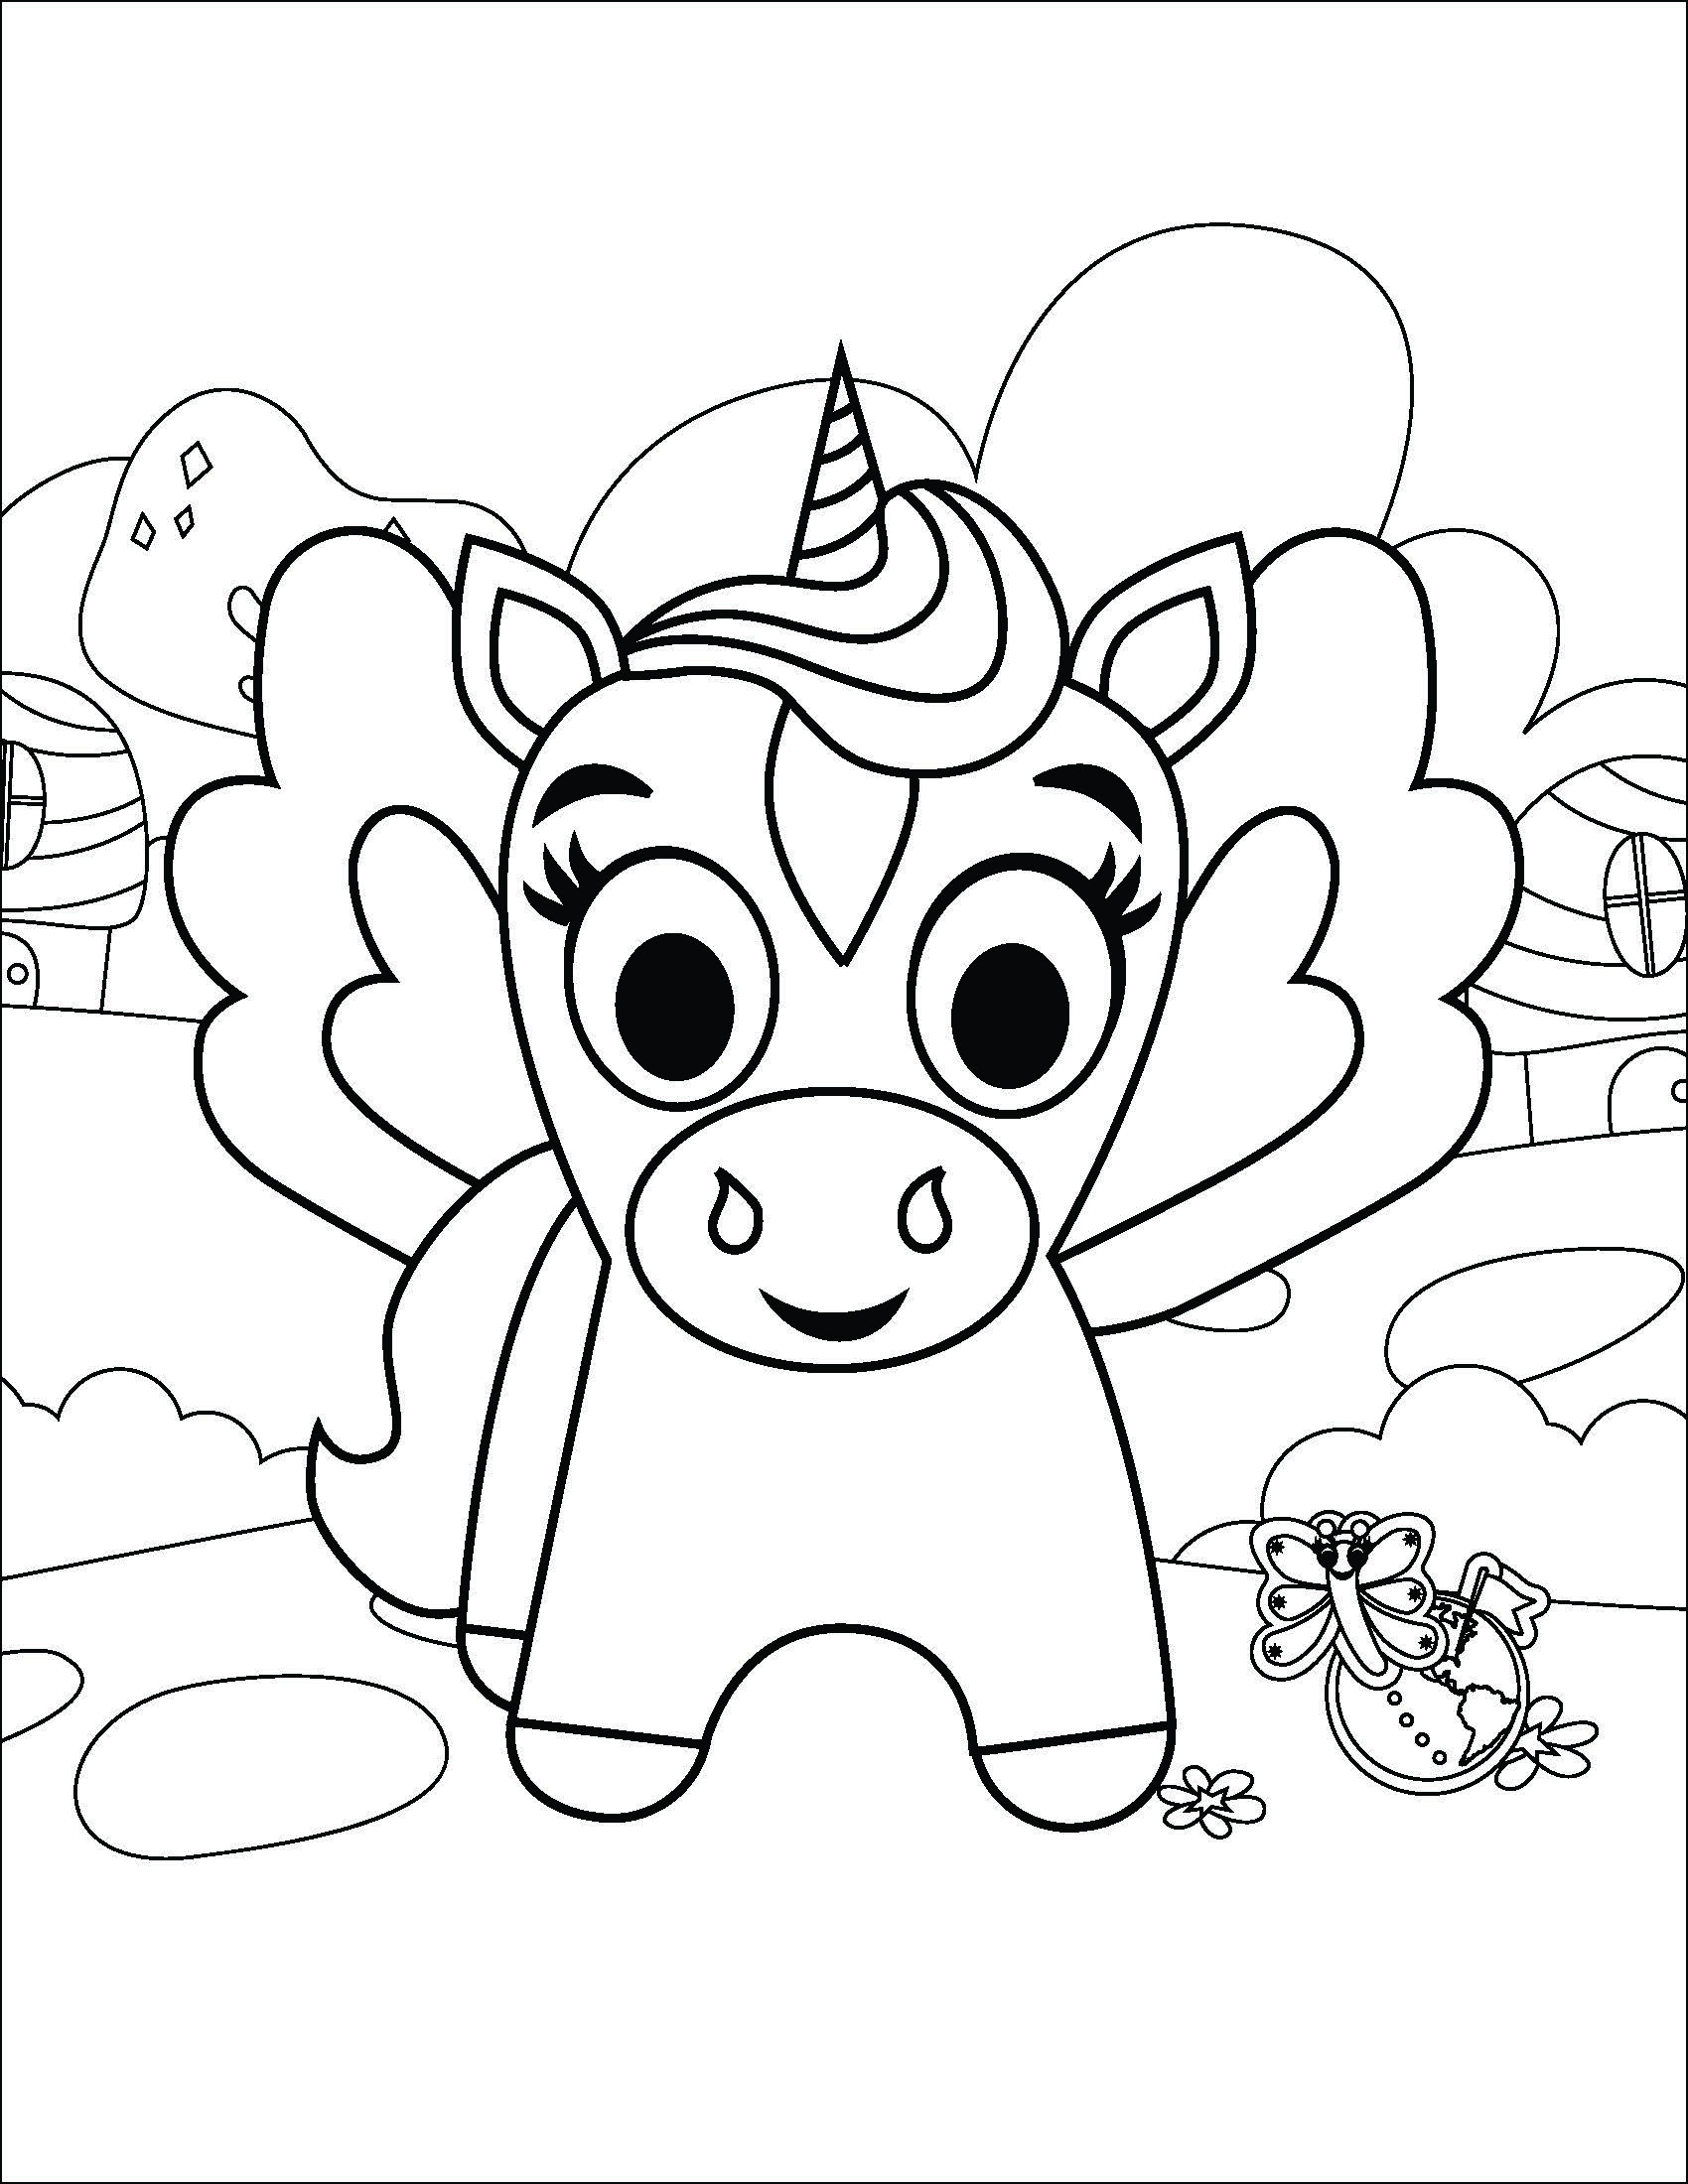 Coloring Pages — FlairFriends